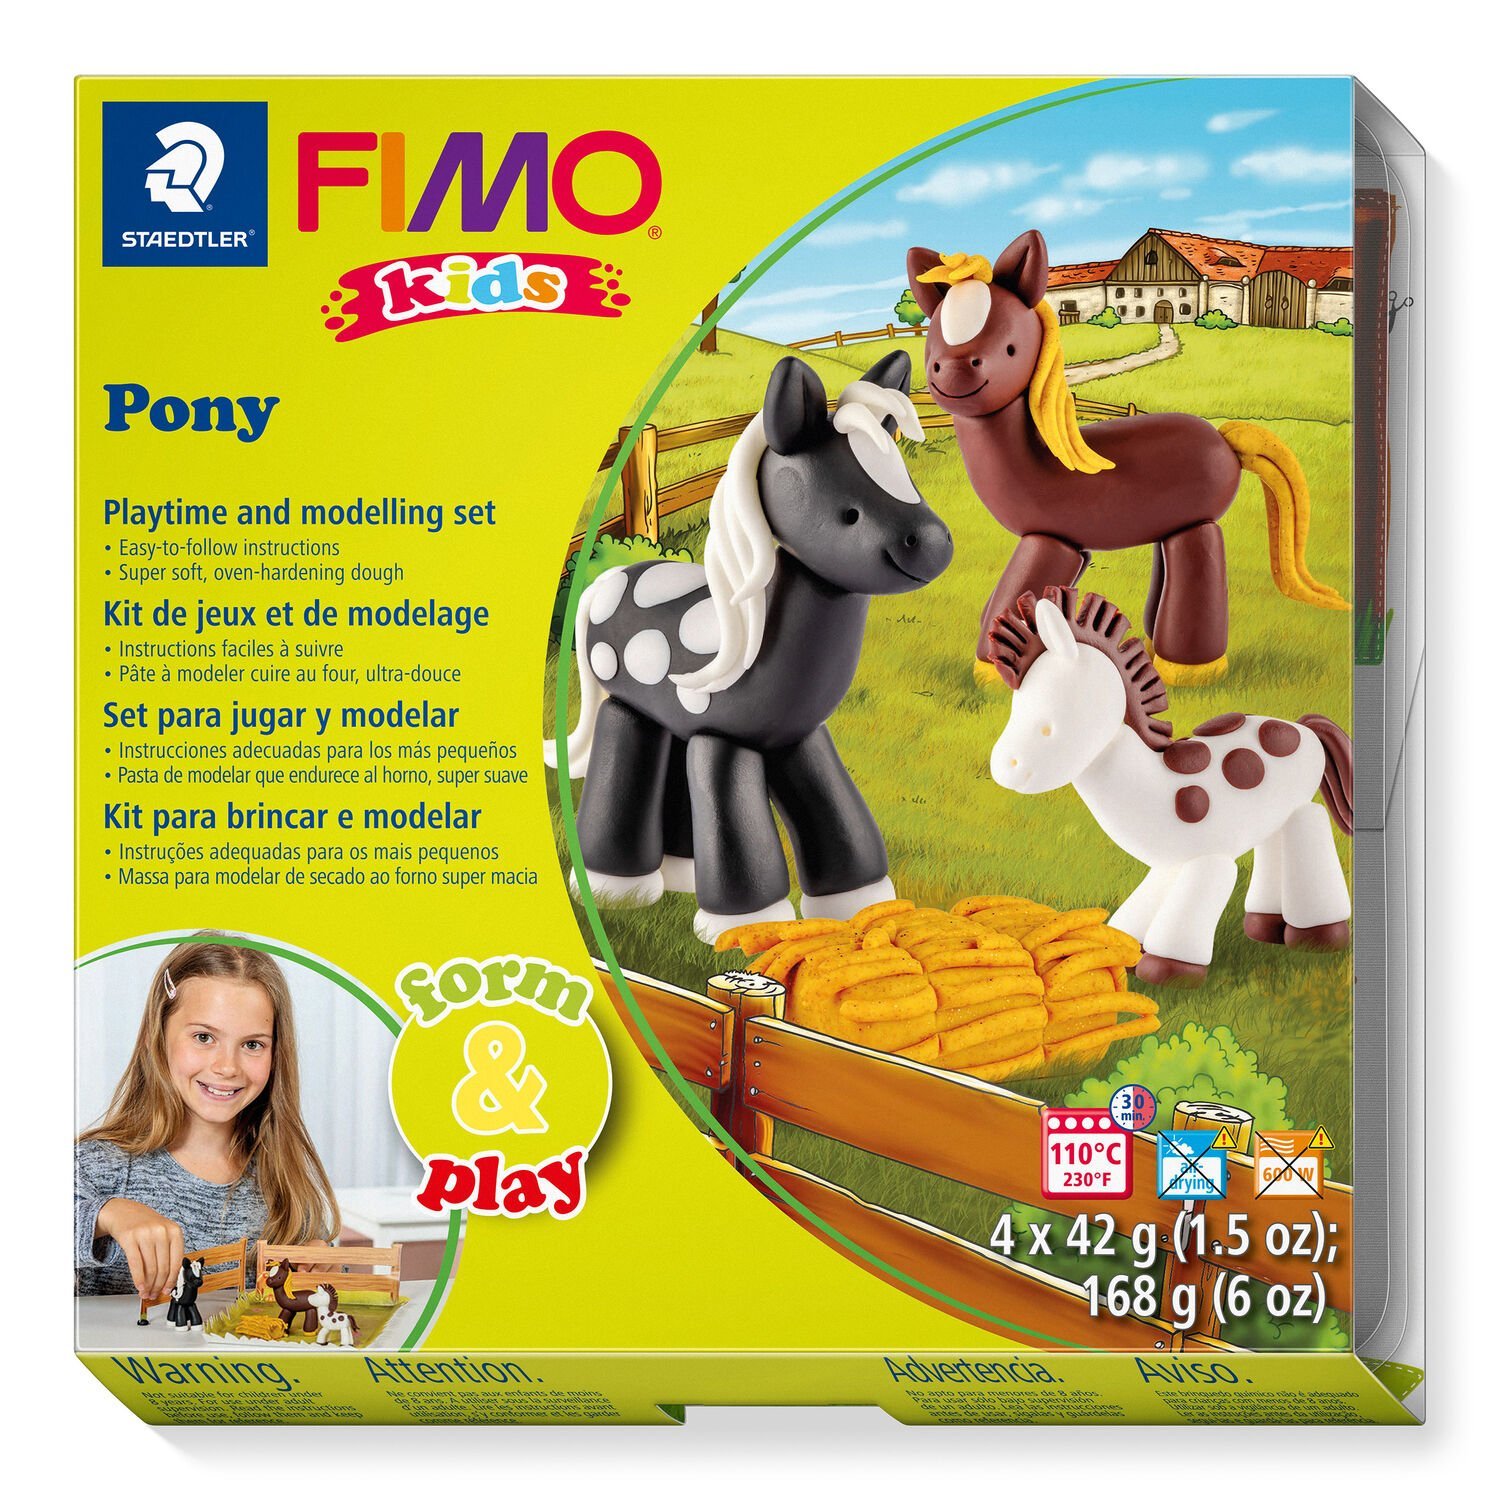 Set "Pony" containing 4 blocks à 42 g (white, brown, glitter gold, black), modelling stick, step-by-step instructions, cut out templates / playing surface, sticker, instruction